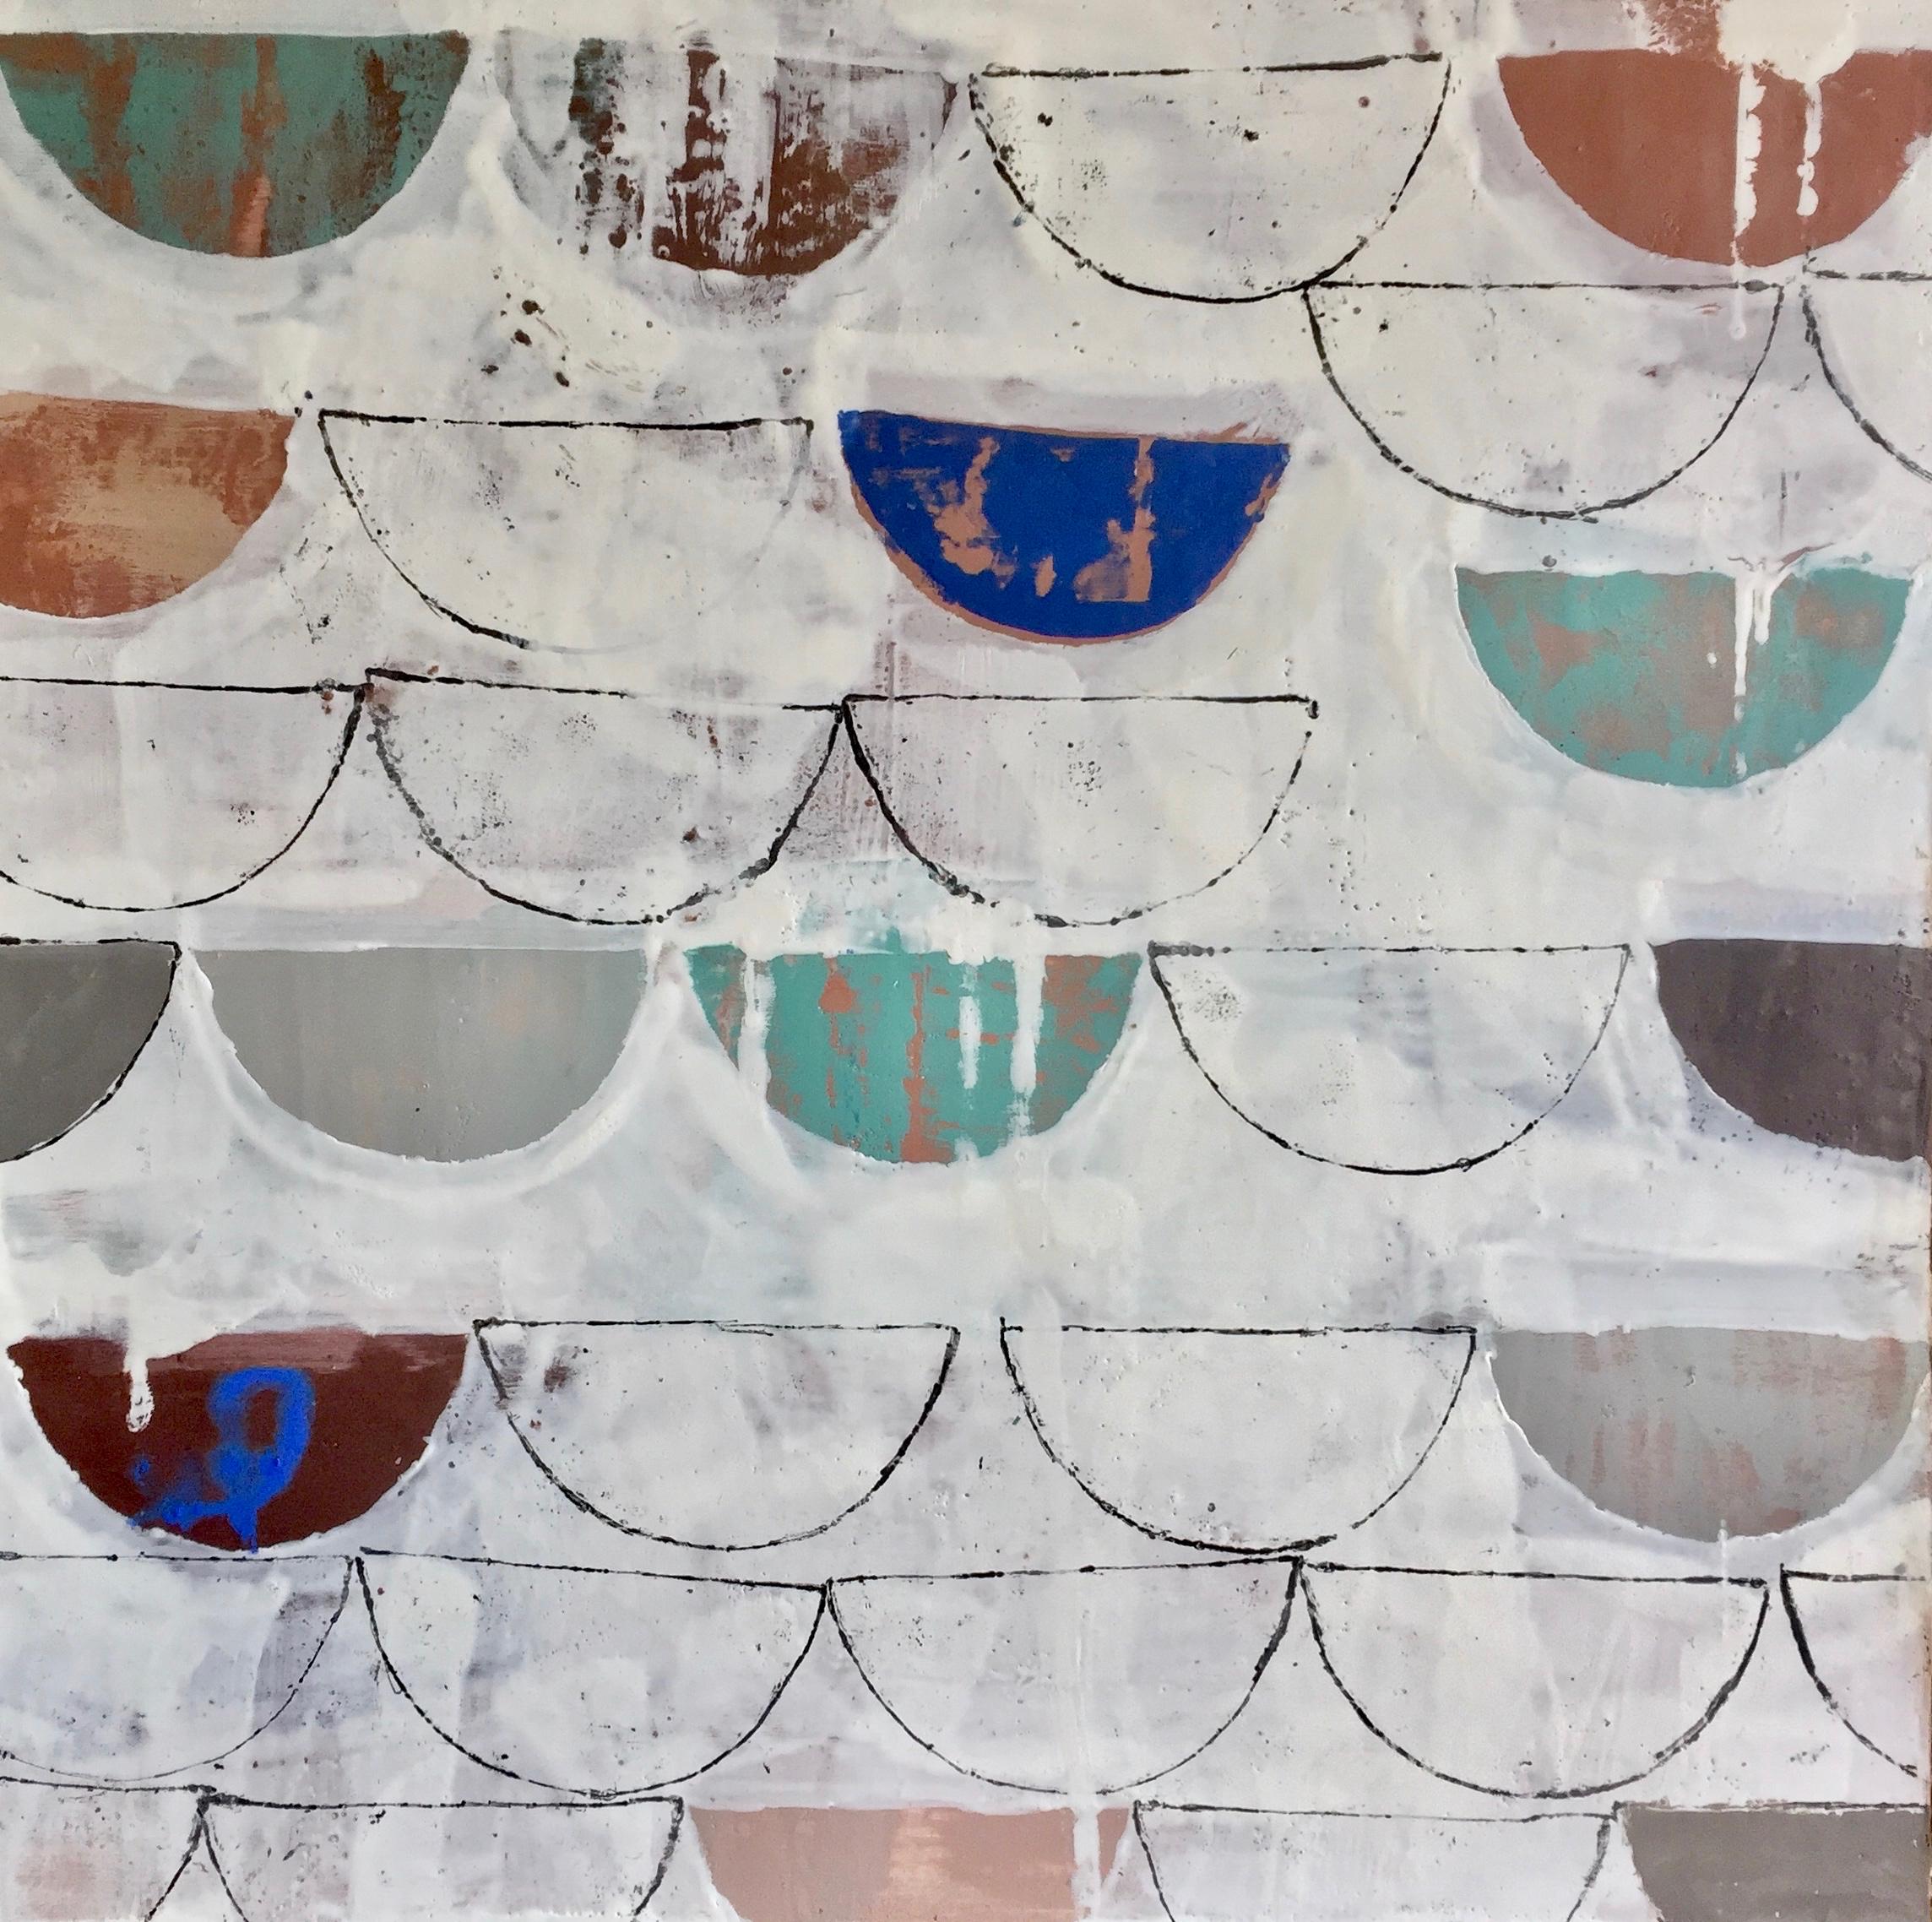 Marissa Voytenko Abstract Painting - "What the Tide Brought In" Encaustic painting, half circles, neutral, blue/green